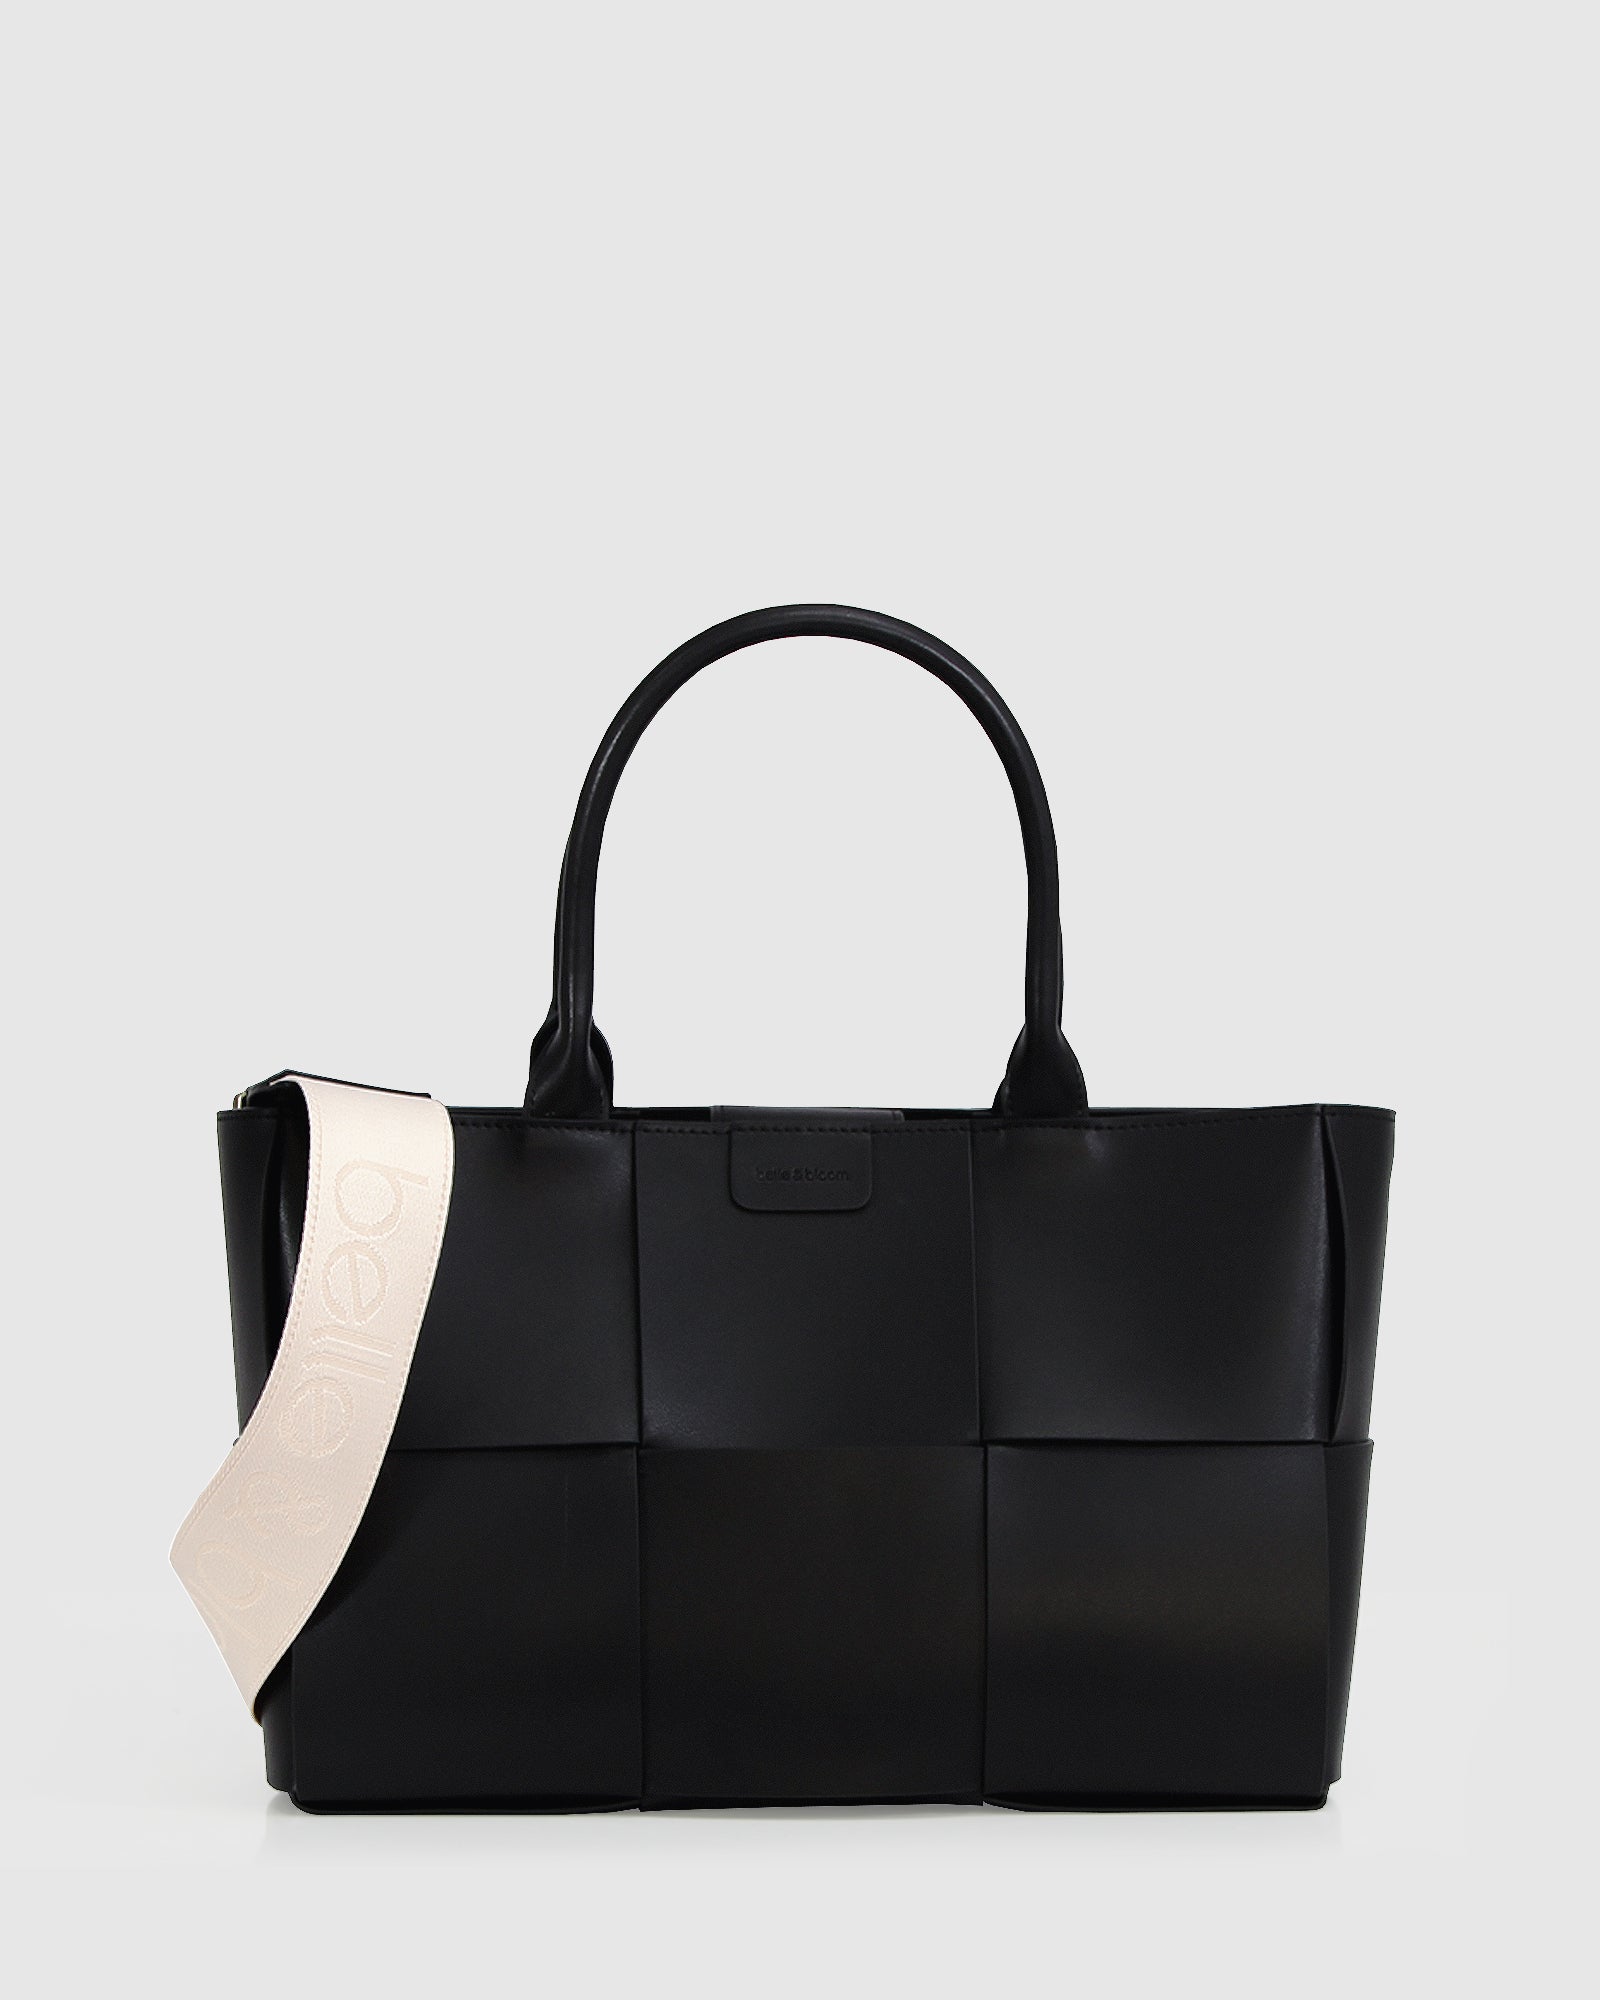 Belle & Bloom Long Way Home Woven Tote - Black female